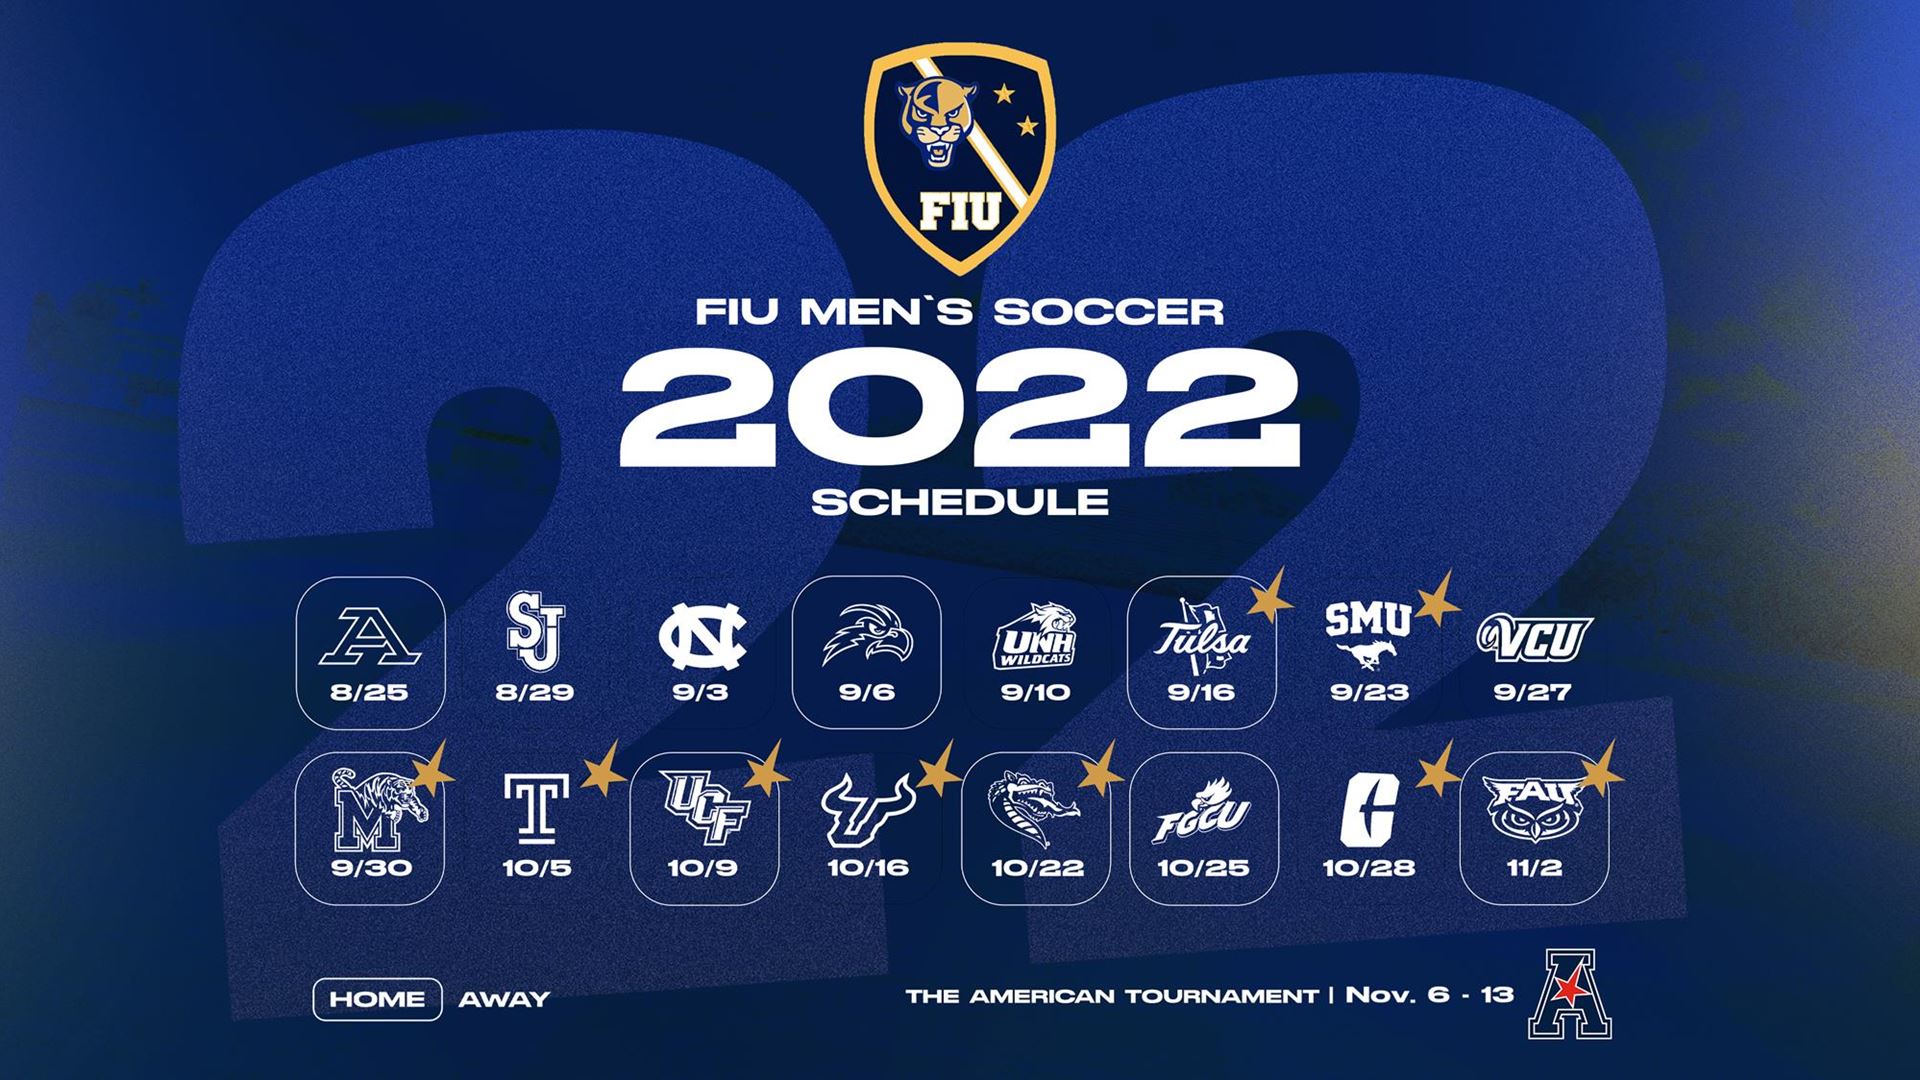 FIU Men’s Soccer Ready for First AAC Season, Announce Stacked Schedule